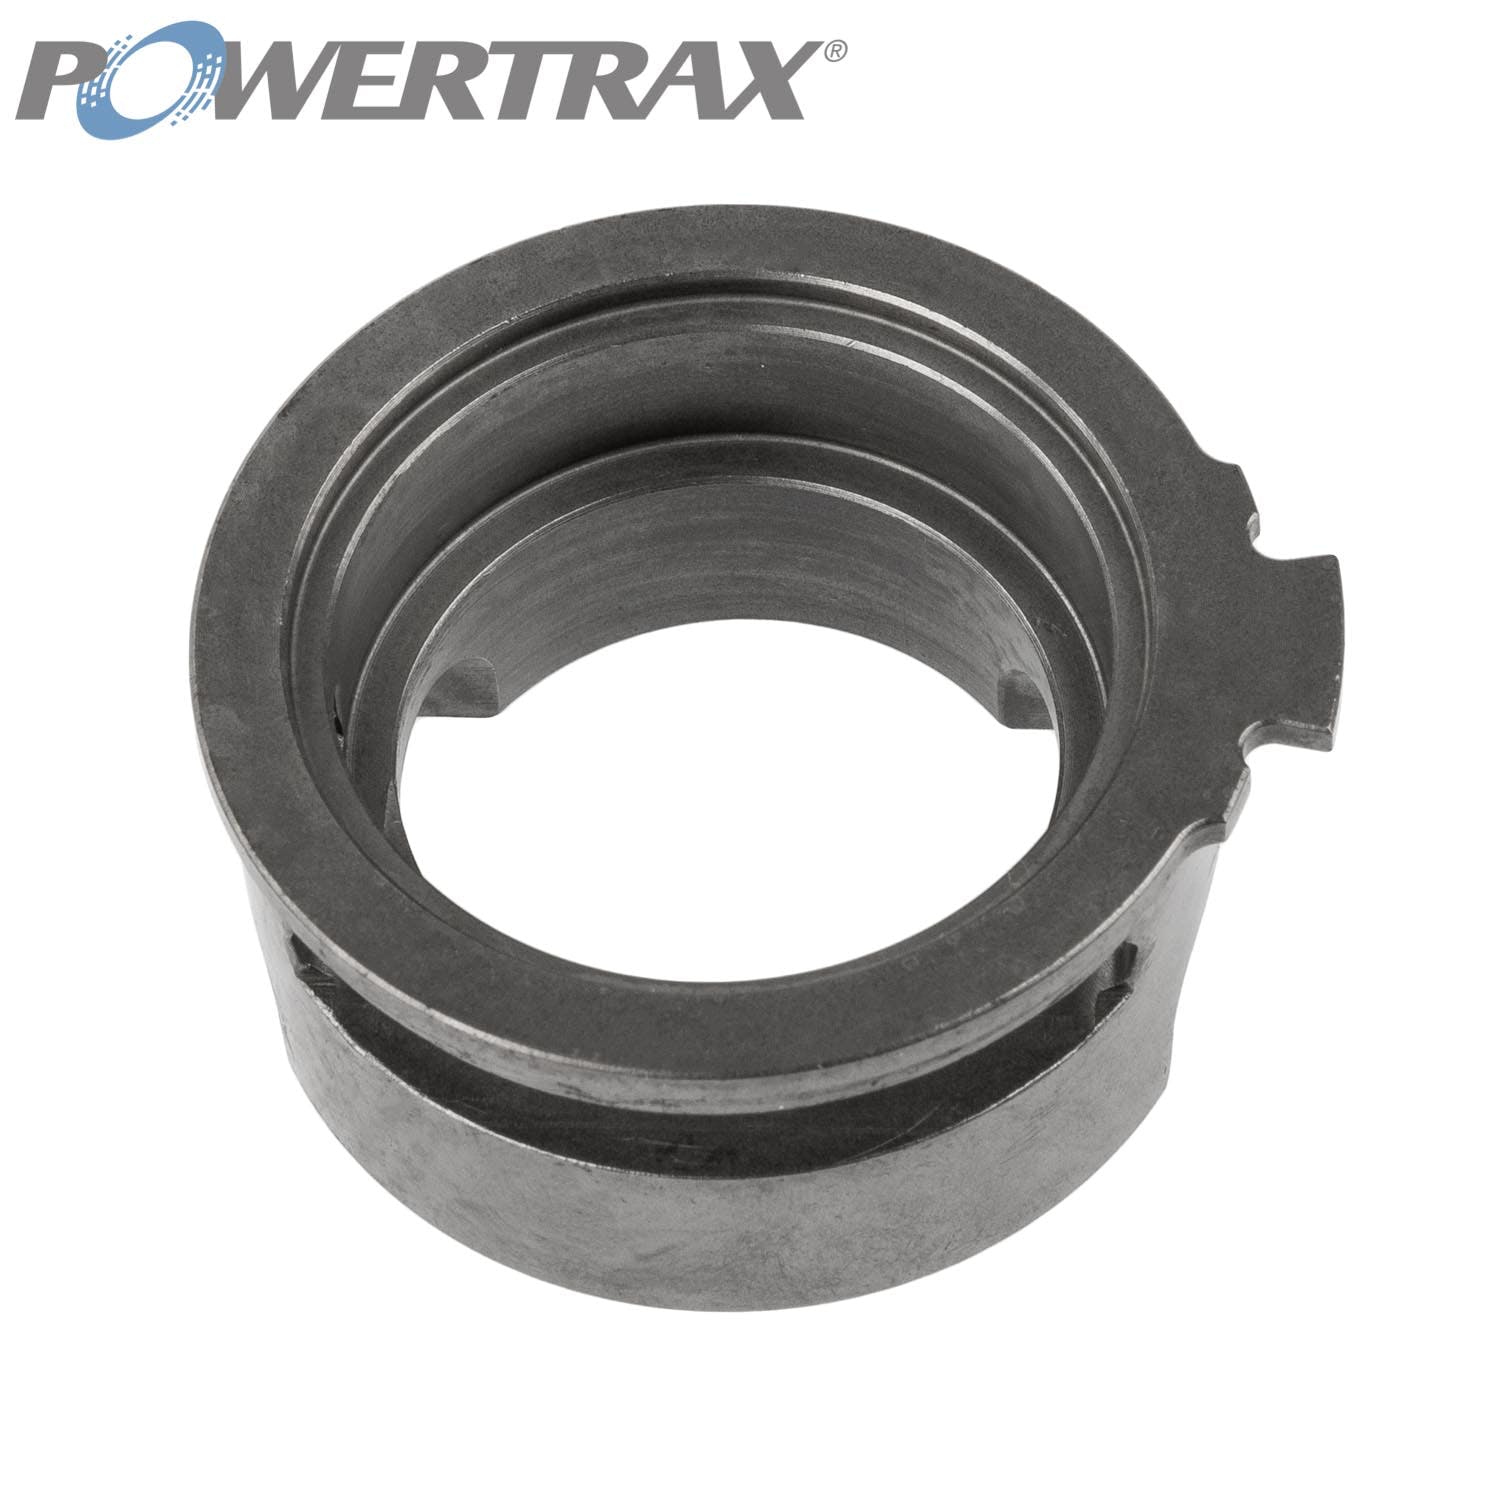 PowerTrax 624059SDR2 Flanged Spacer, SDR, 6241059-2